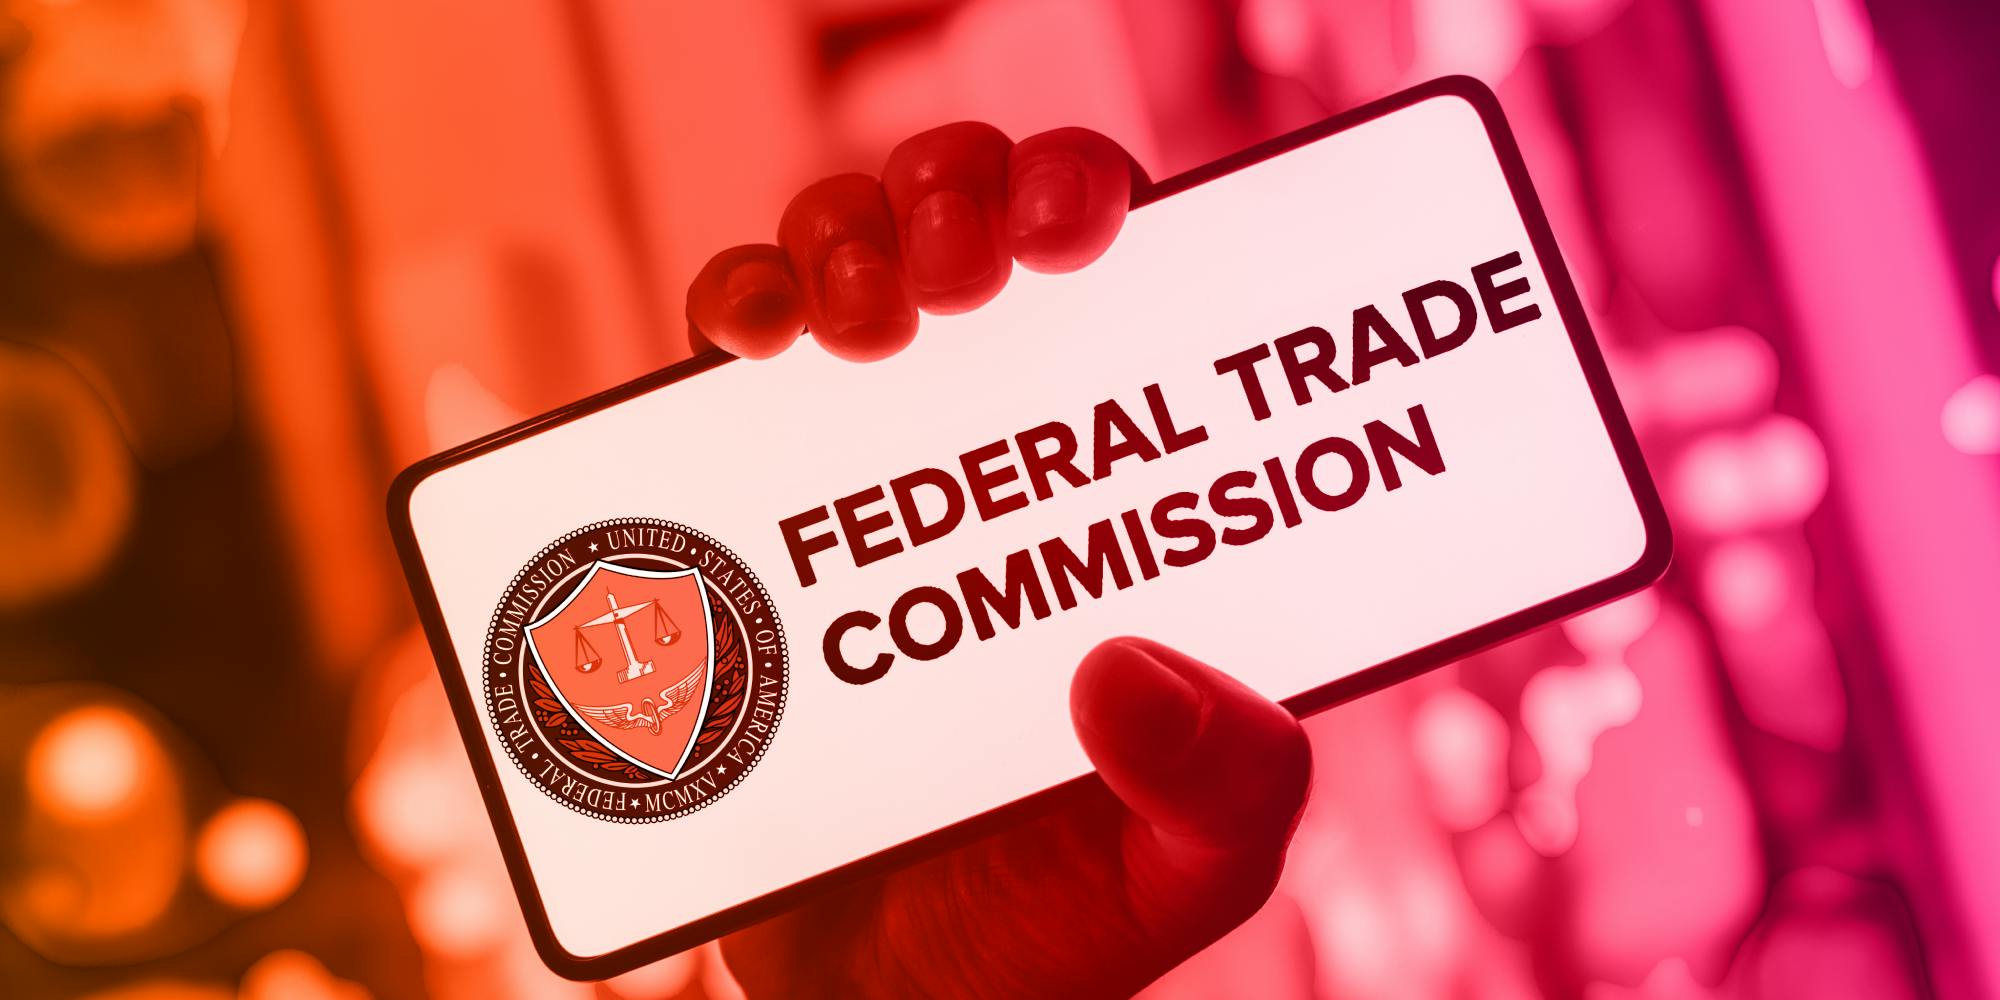 The FTC Just Banned Non-Competes — Here’s Why It Matters For Creators